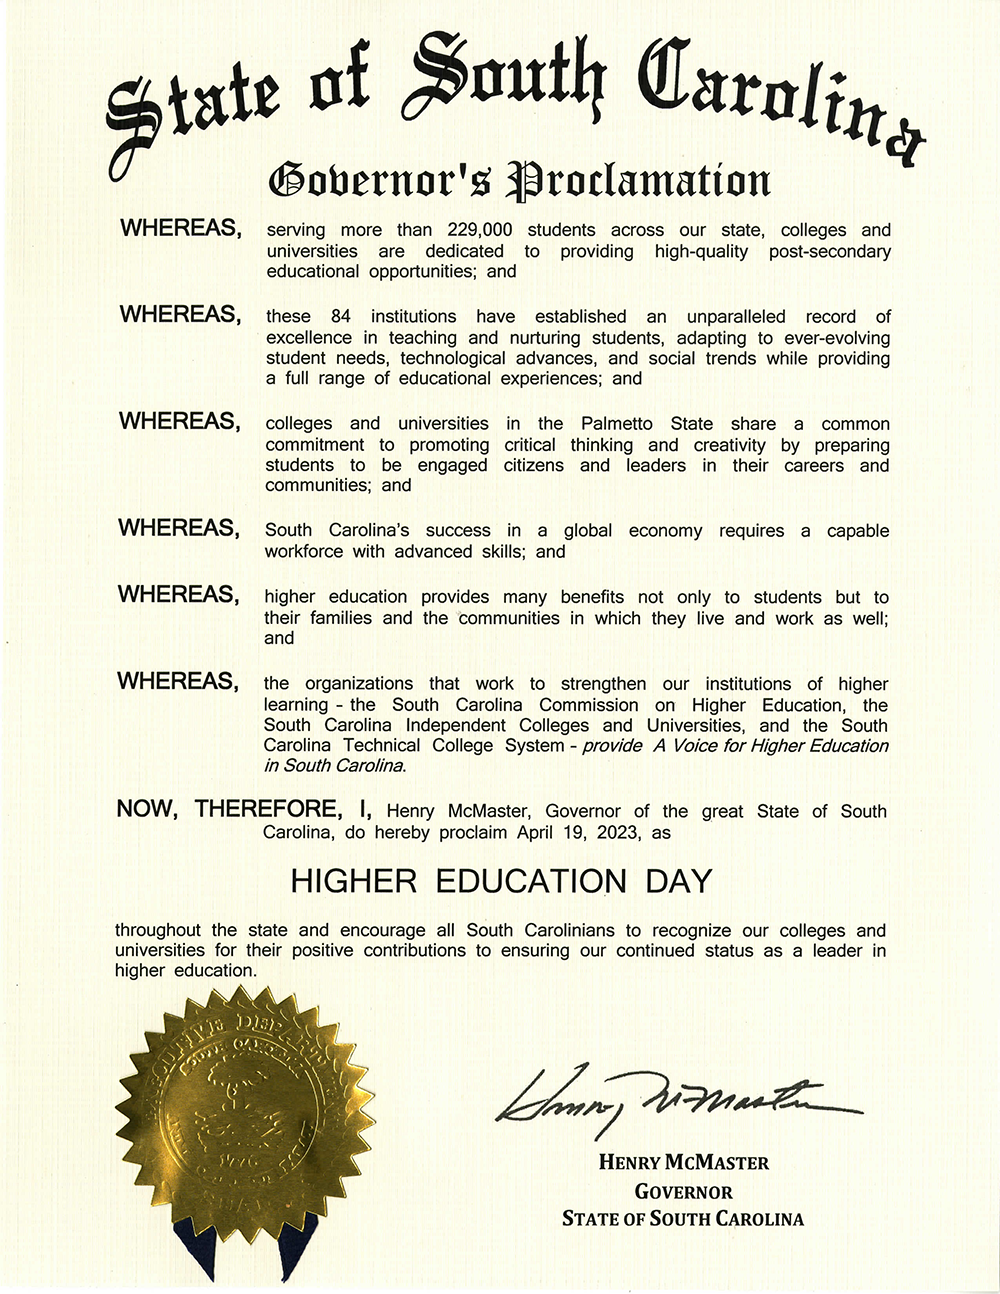 Gov. Henry McMaster proclaimed April 19, 2023 as Higher Education Day in South Carolina.